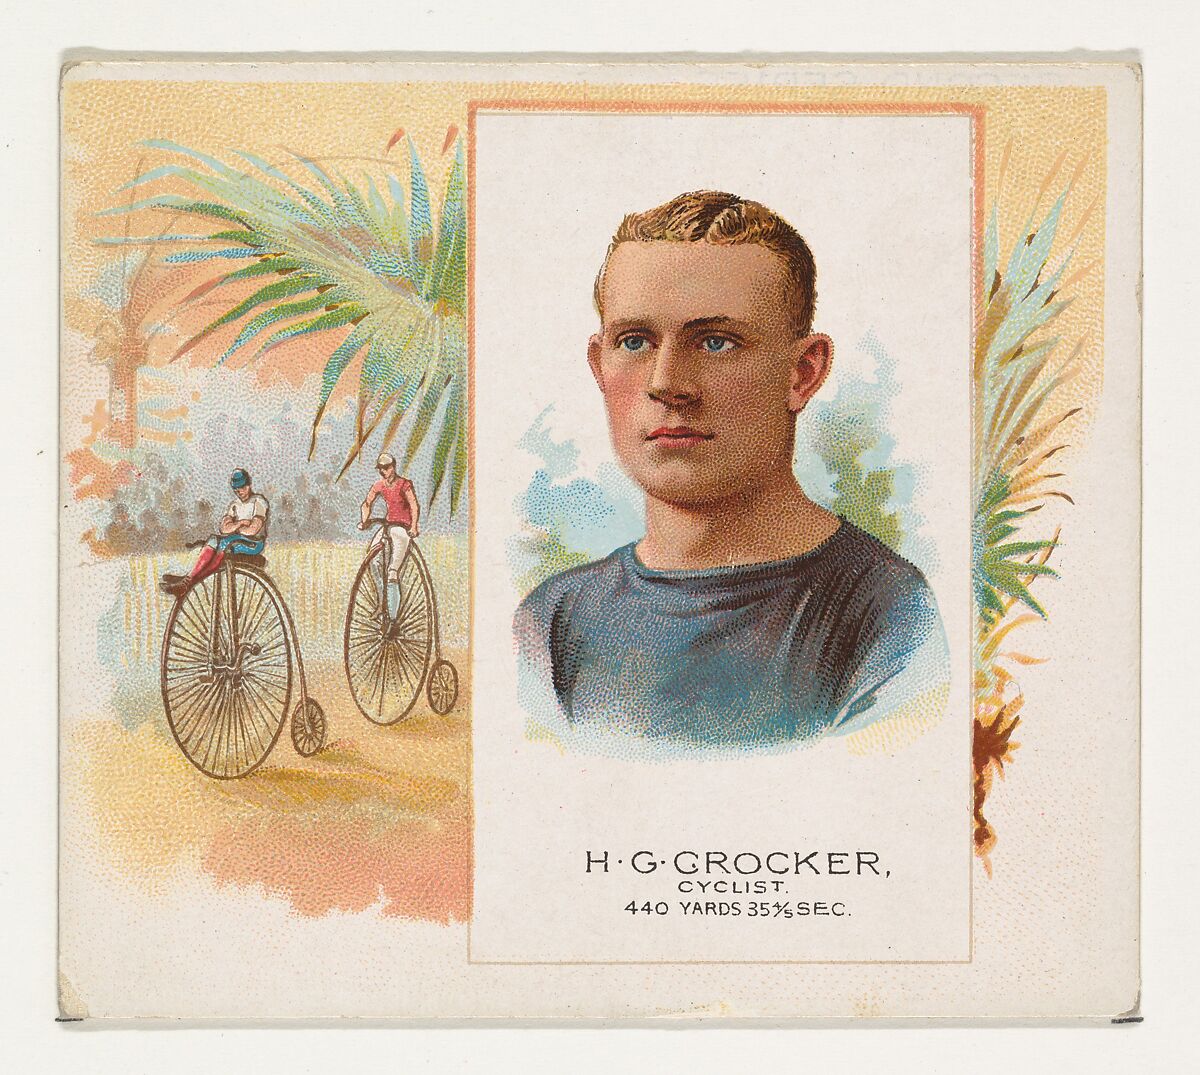 H.G. Crocker, Cyclist, from World's Champions, Second Series (N43) for Allen & Ginter Cigarettes, Allen &amp; Ginter (American, Richmond, Virginia), Commercial lithograph 